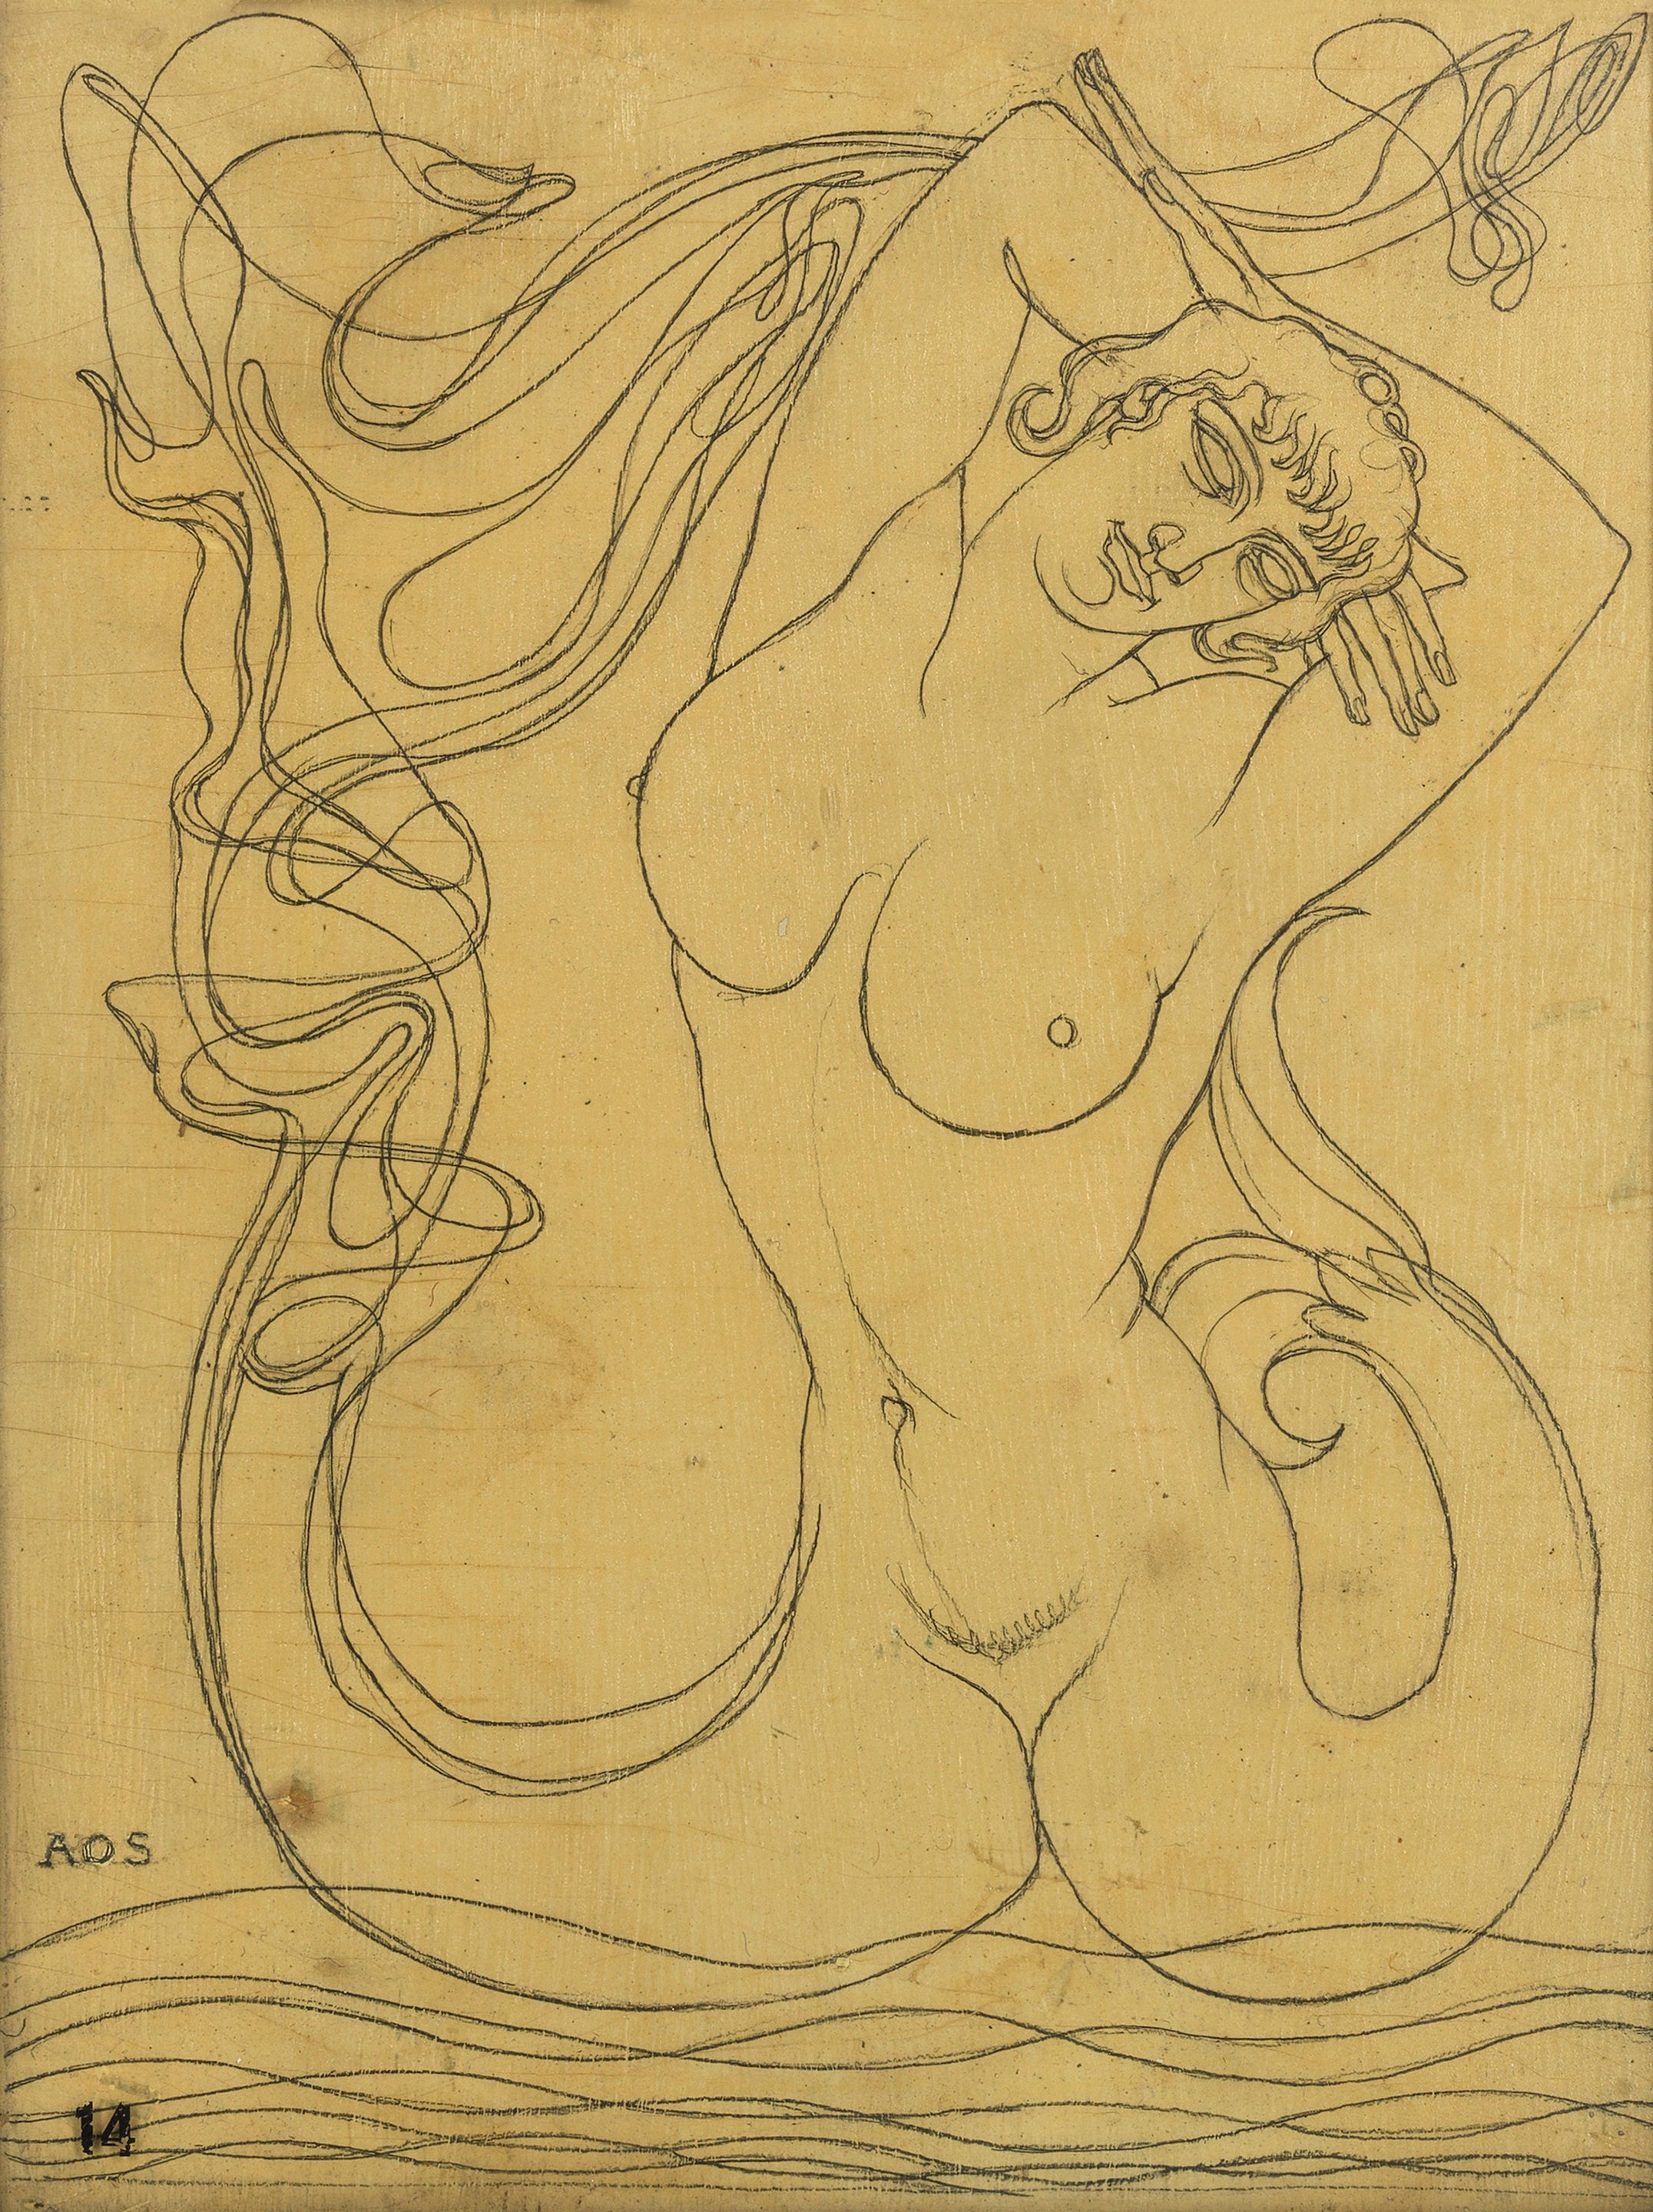 Out of the Sea Came Entity by Austin Osman Spare, 1955